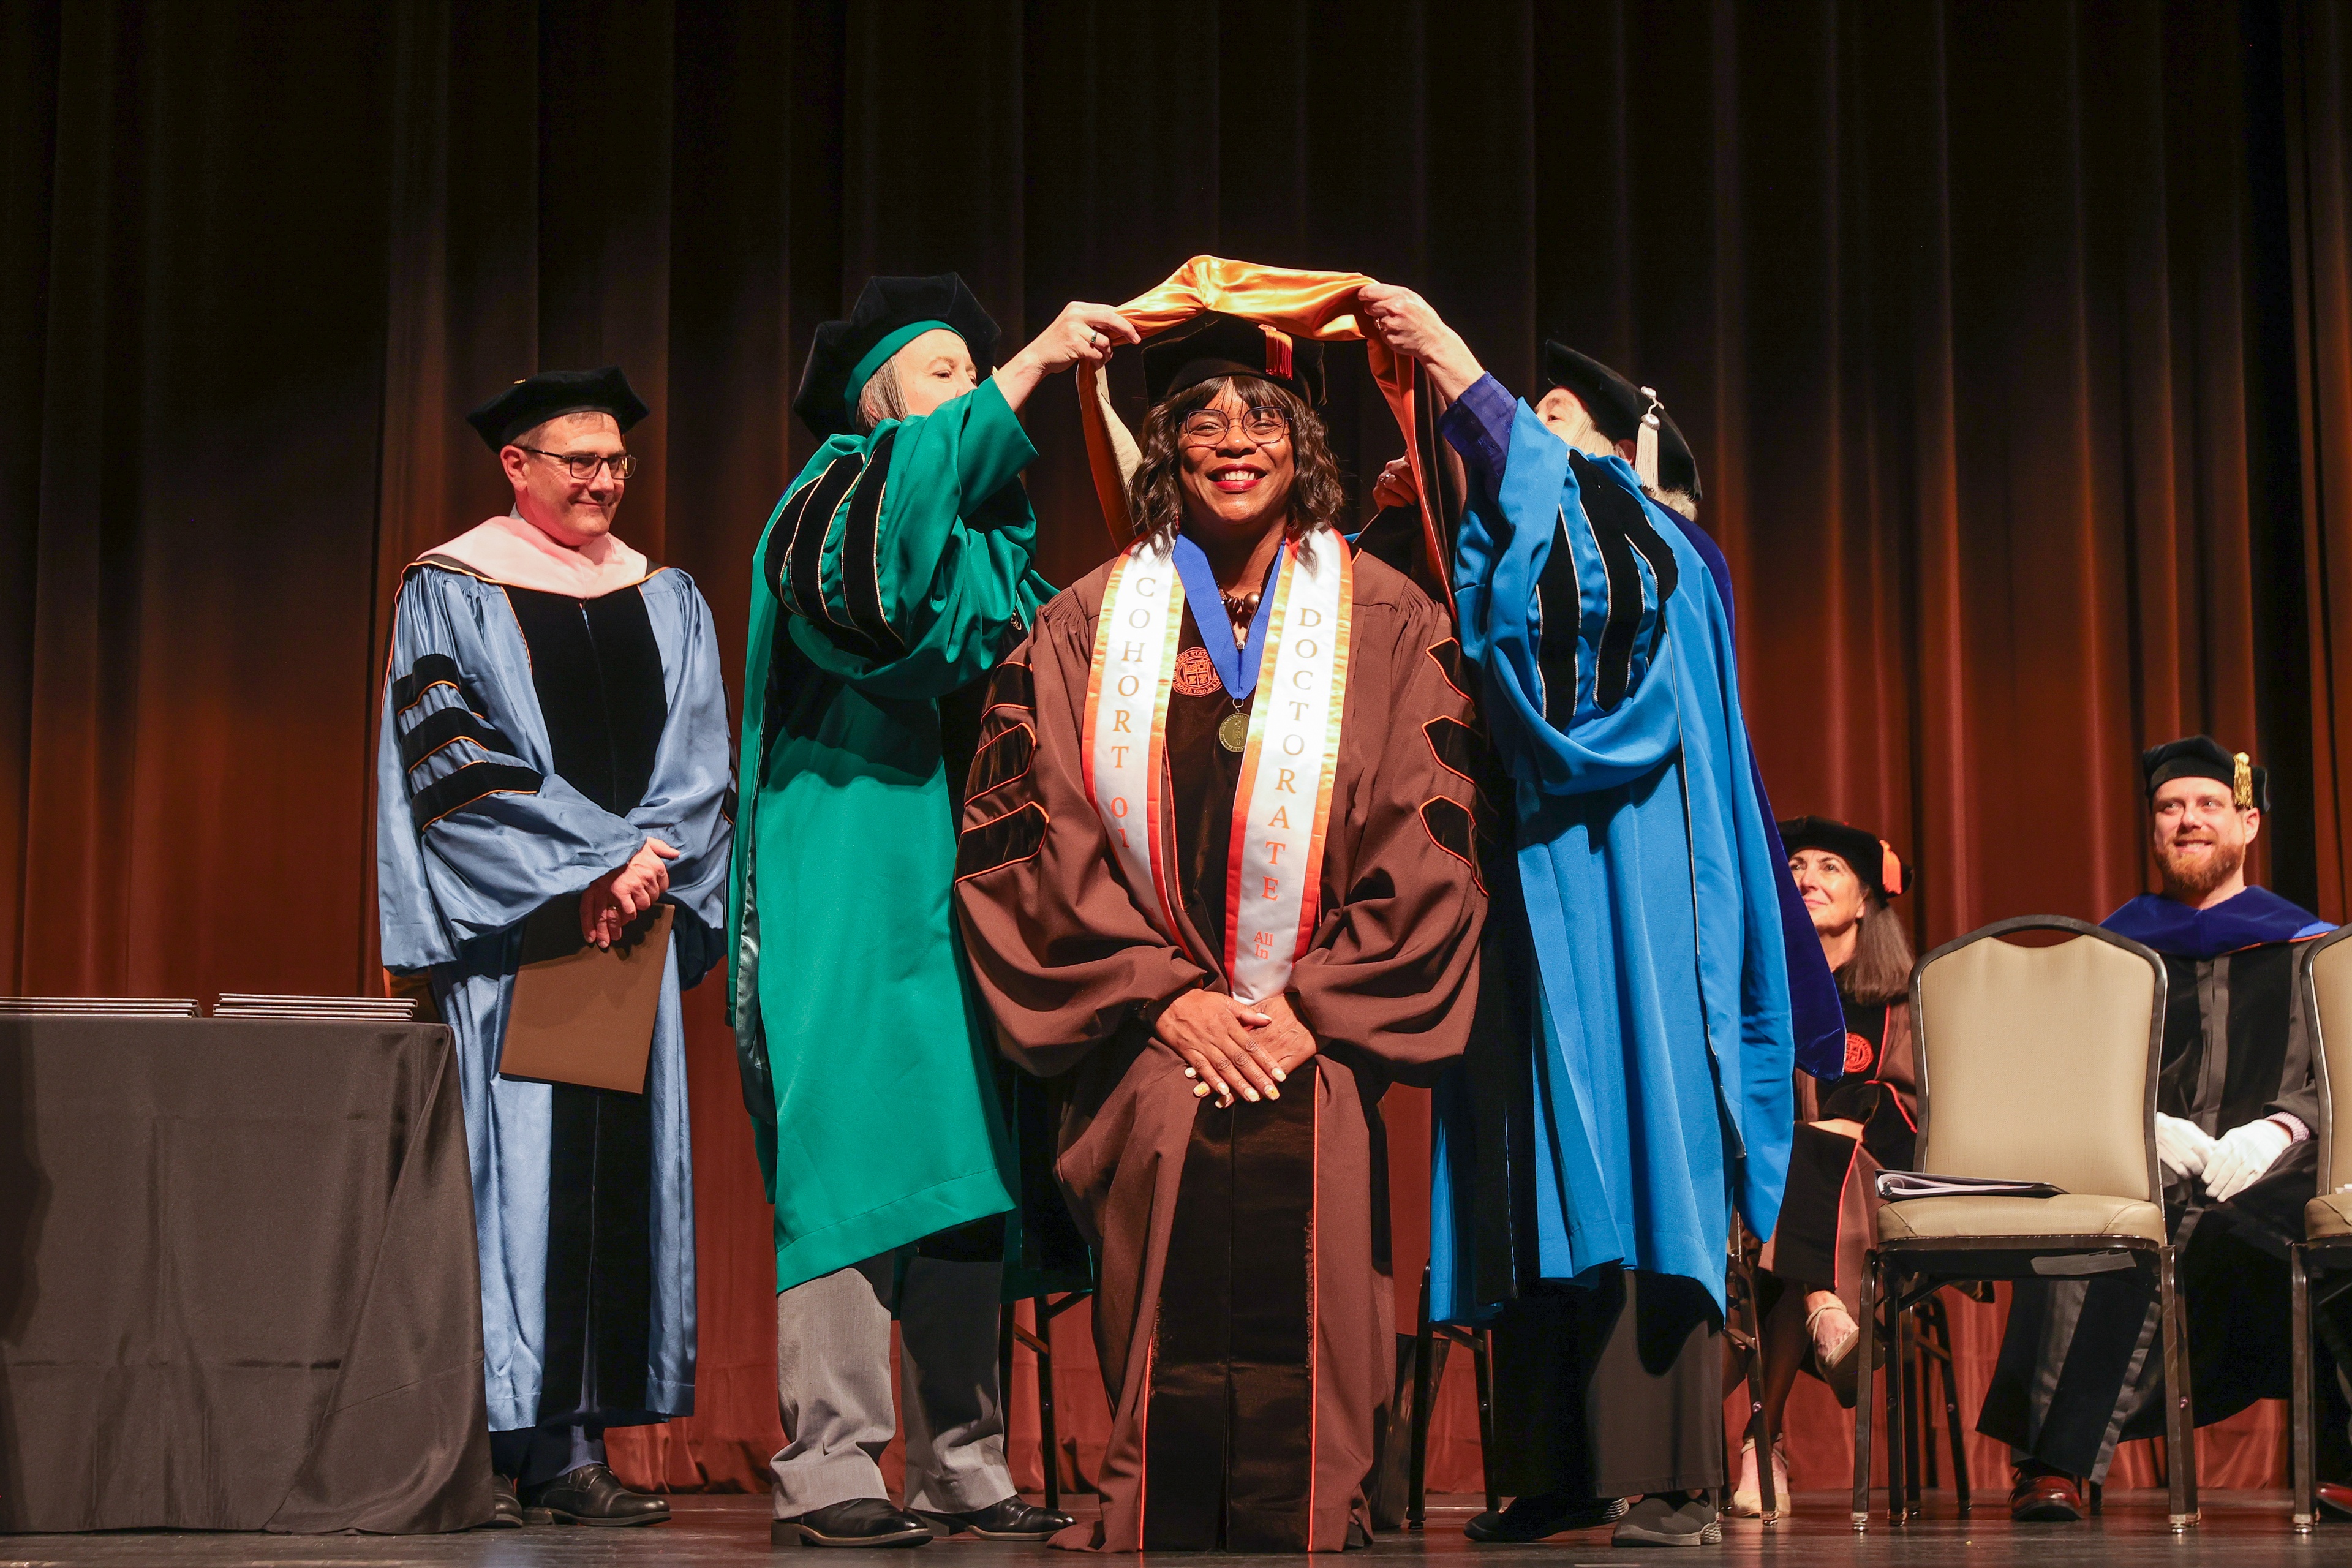 A BGSU doctoral student is hooded on stage at Kobacker Hall